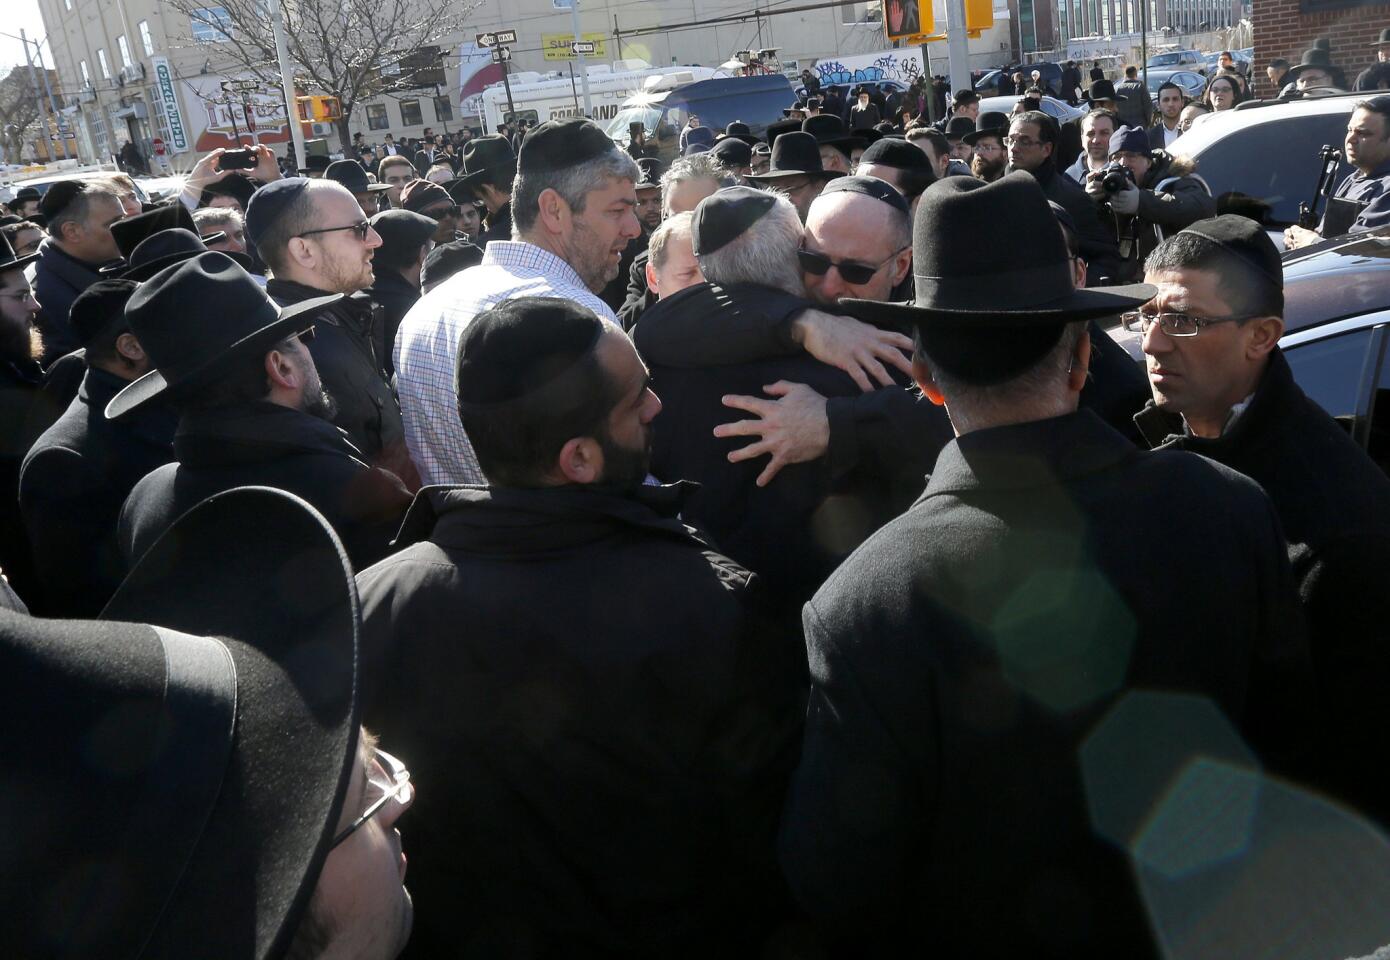 Mourners embrace each other after funeral services for the seven siblings killed in a house fire on March 22, 2015, in Brooklyn.